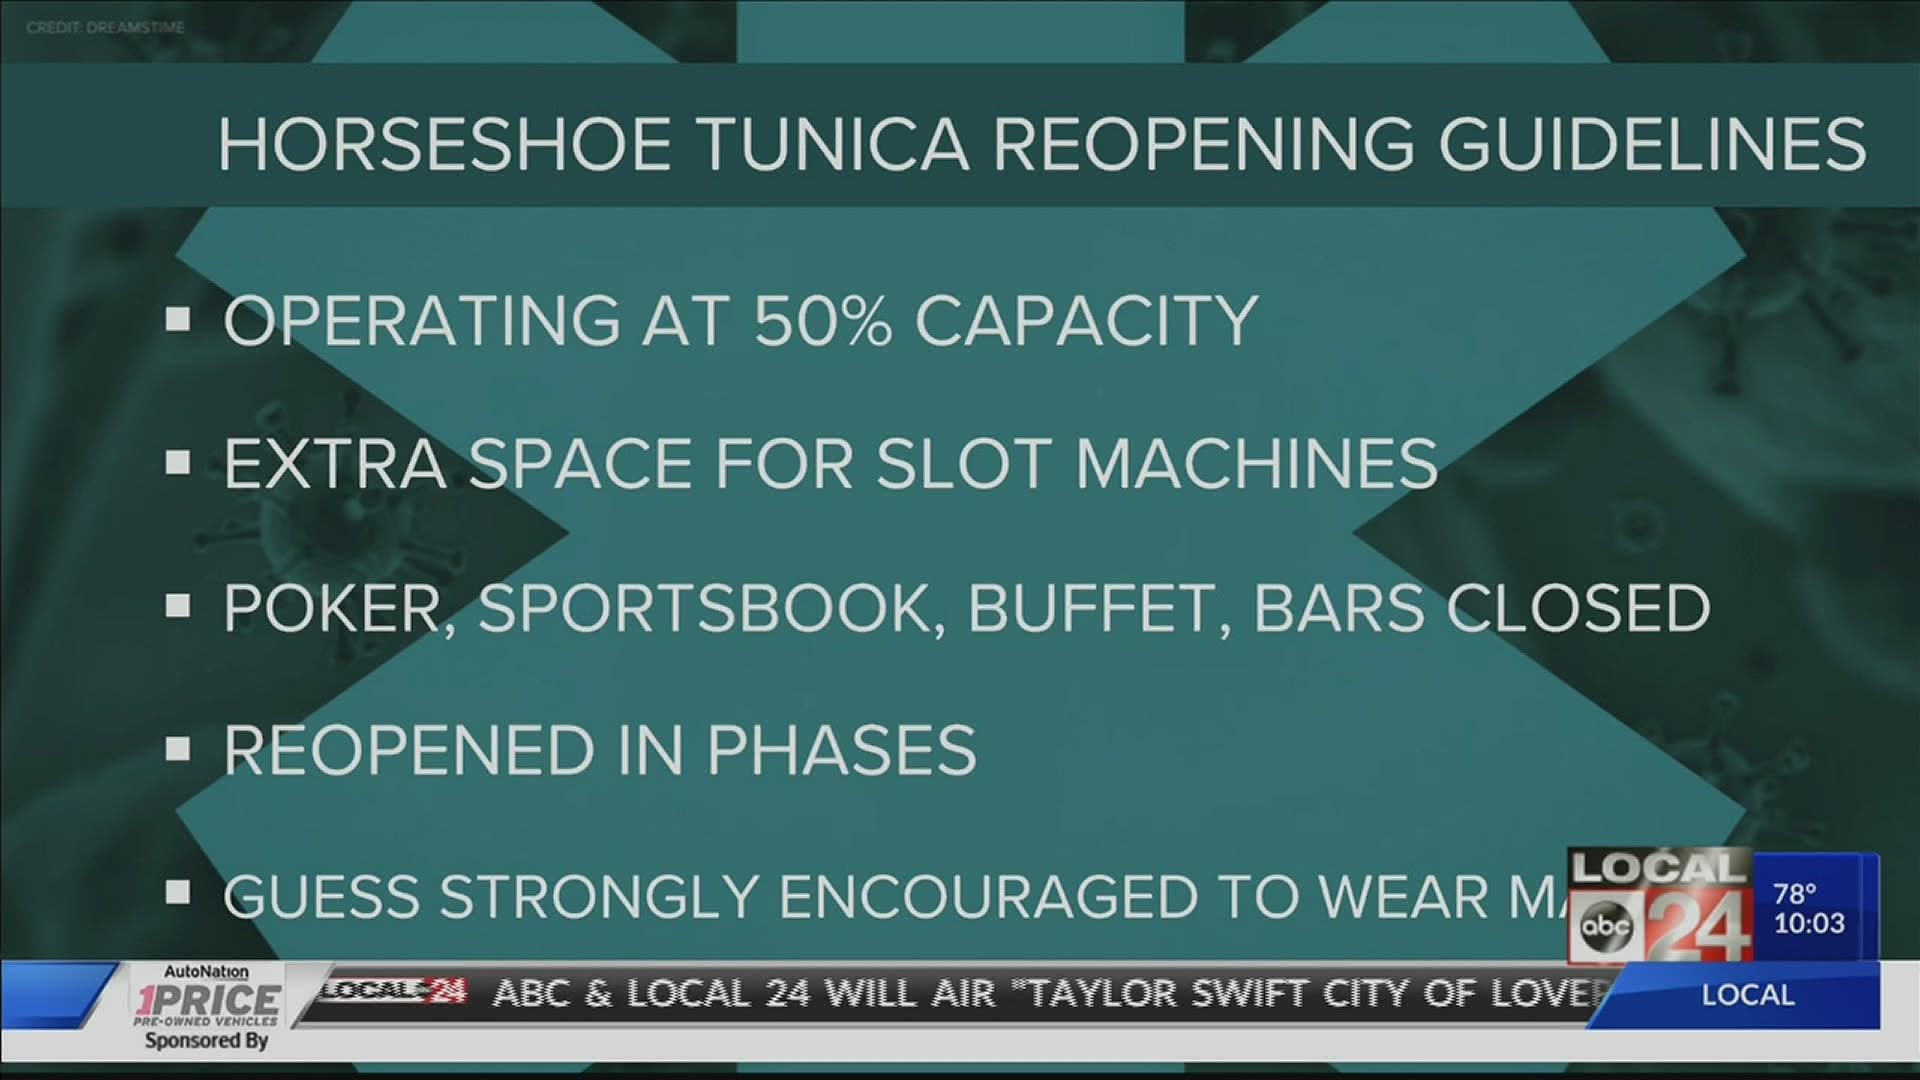 Horseshoe Tunica announced they will reopen their doors Thursday May 21st at 8AM.